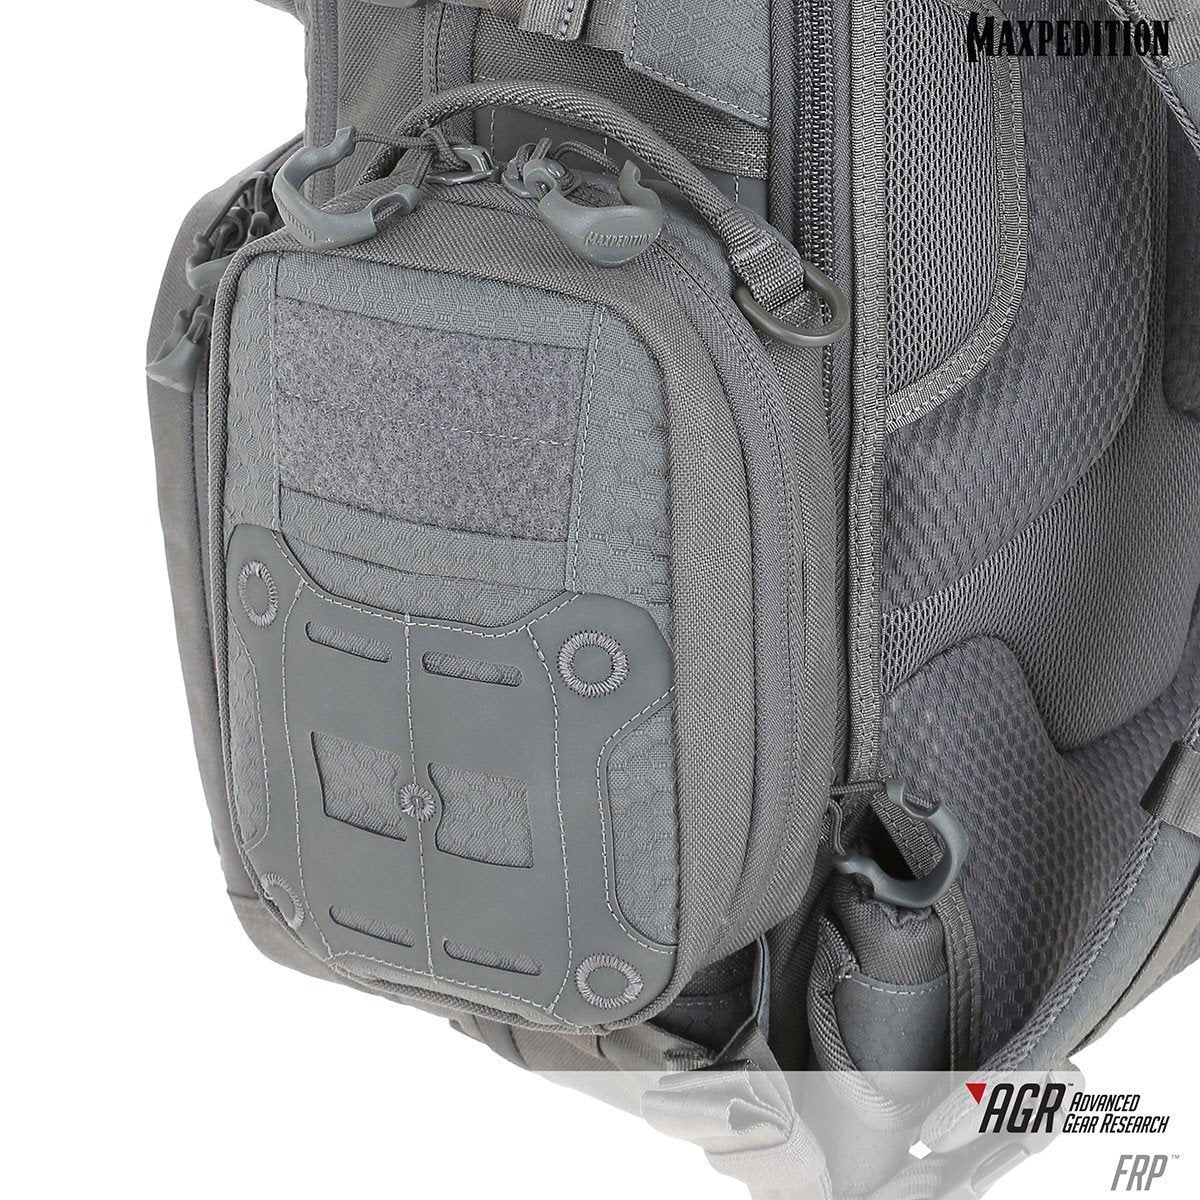 FRP™ First Response Pouch | Maxpedition  Tactical Gear